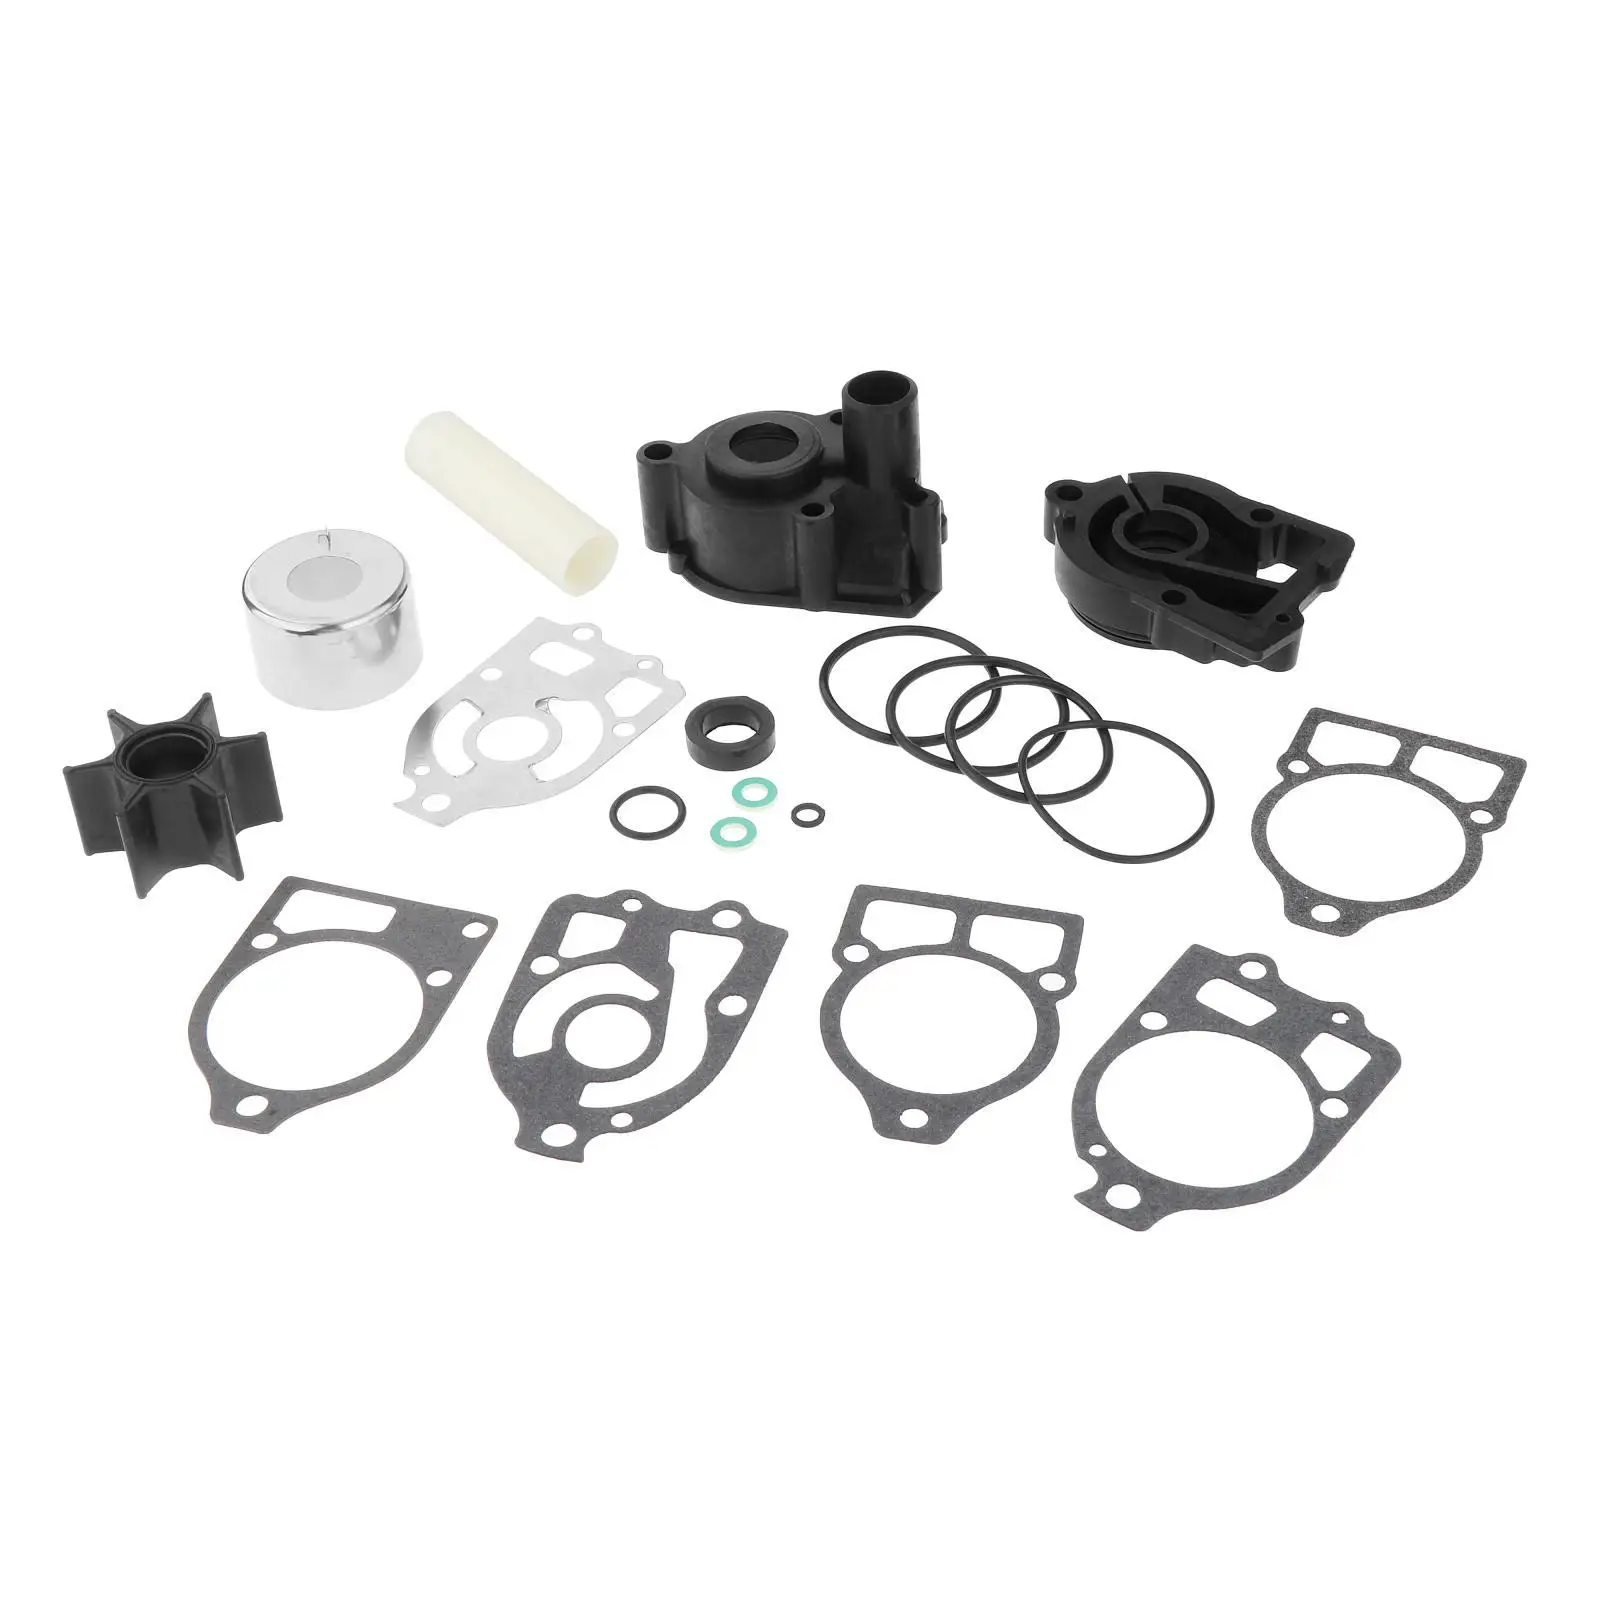 Water Pump Repair Kit with Housing   Parts 46-48747A3 Replacement